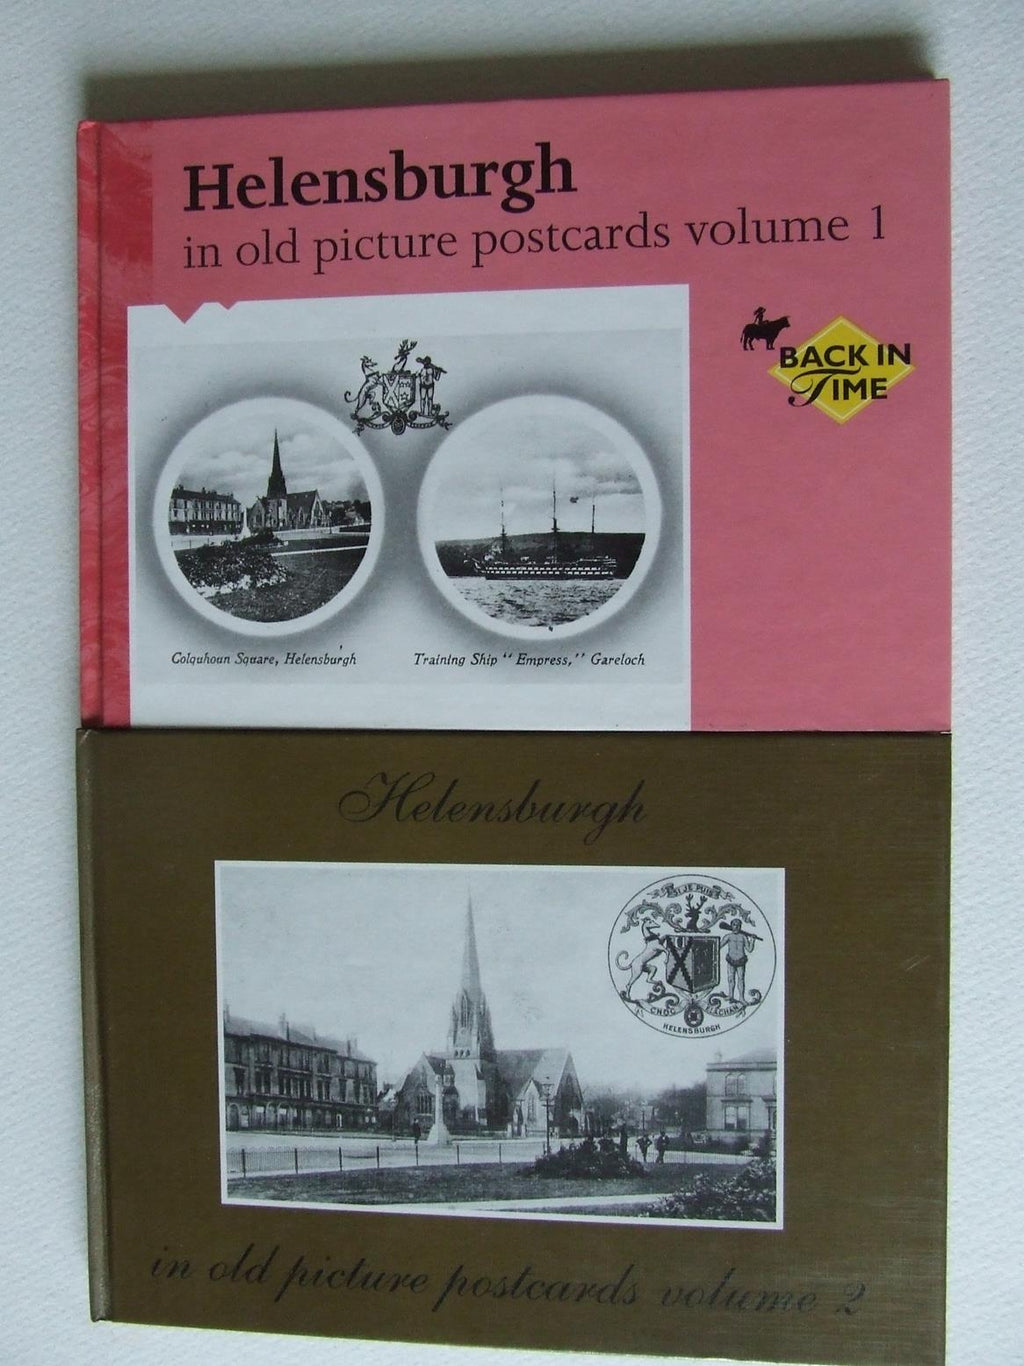 Helensburgh in Old Picture Postcards - volumes 1 and 2